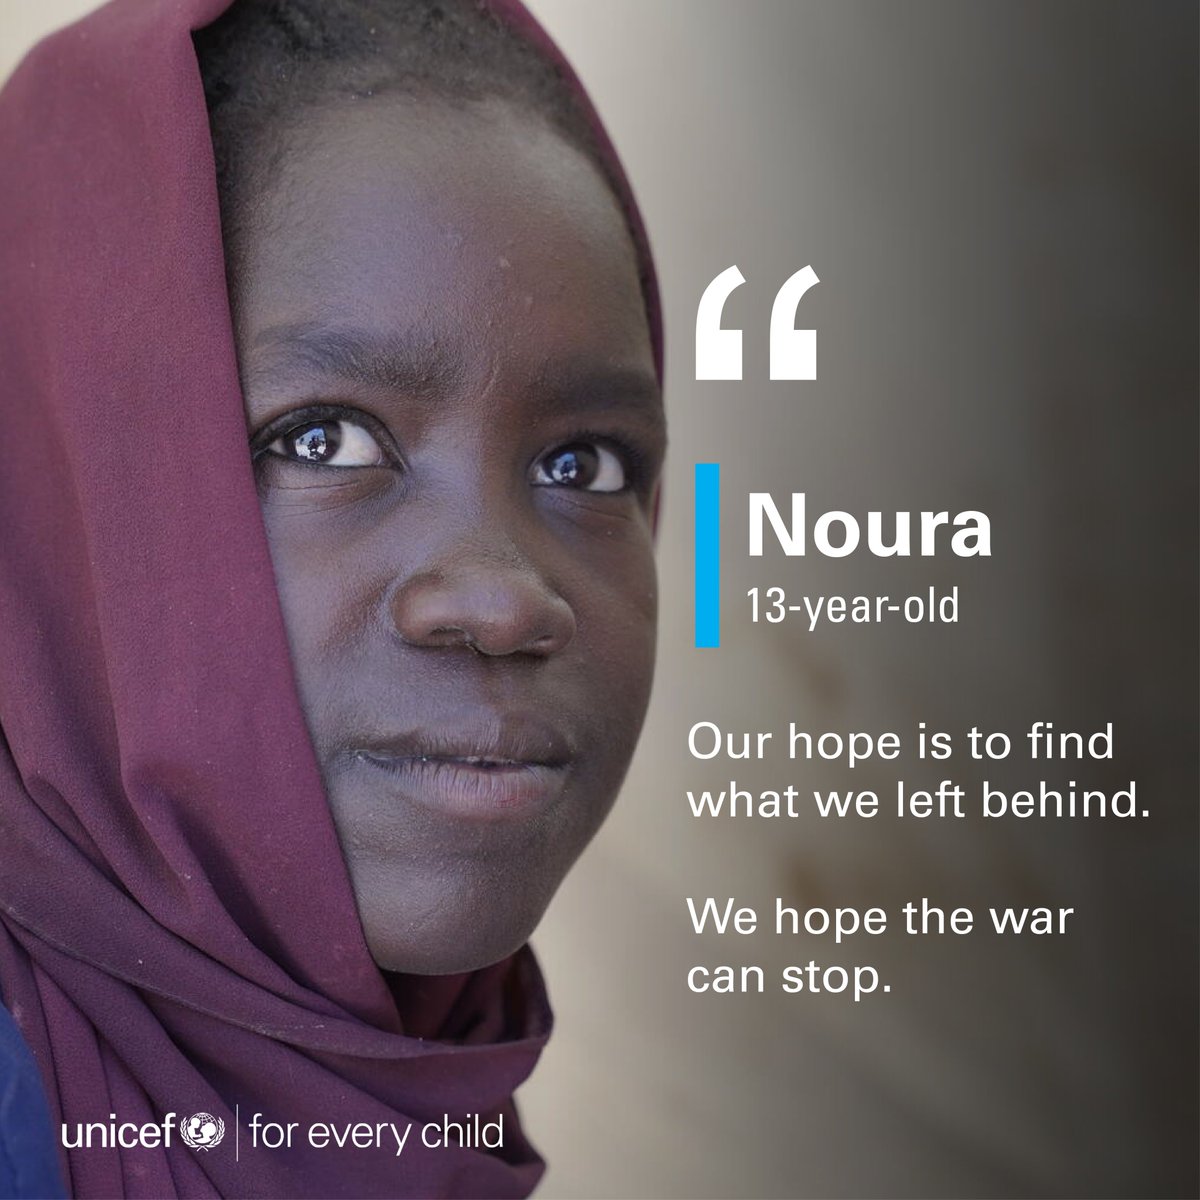 Noura, 13 years, was displaced from Tawila to El Fasher in North Darfur when the war started in #Sudan.​

The renewed clashes in El Fasher damaged a paediatric hospital, killed 2 children and put the lives & well-being of 750,000 children at risk.

Children are #NotATarget.